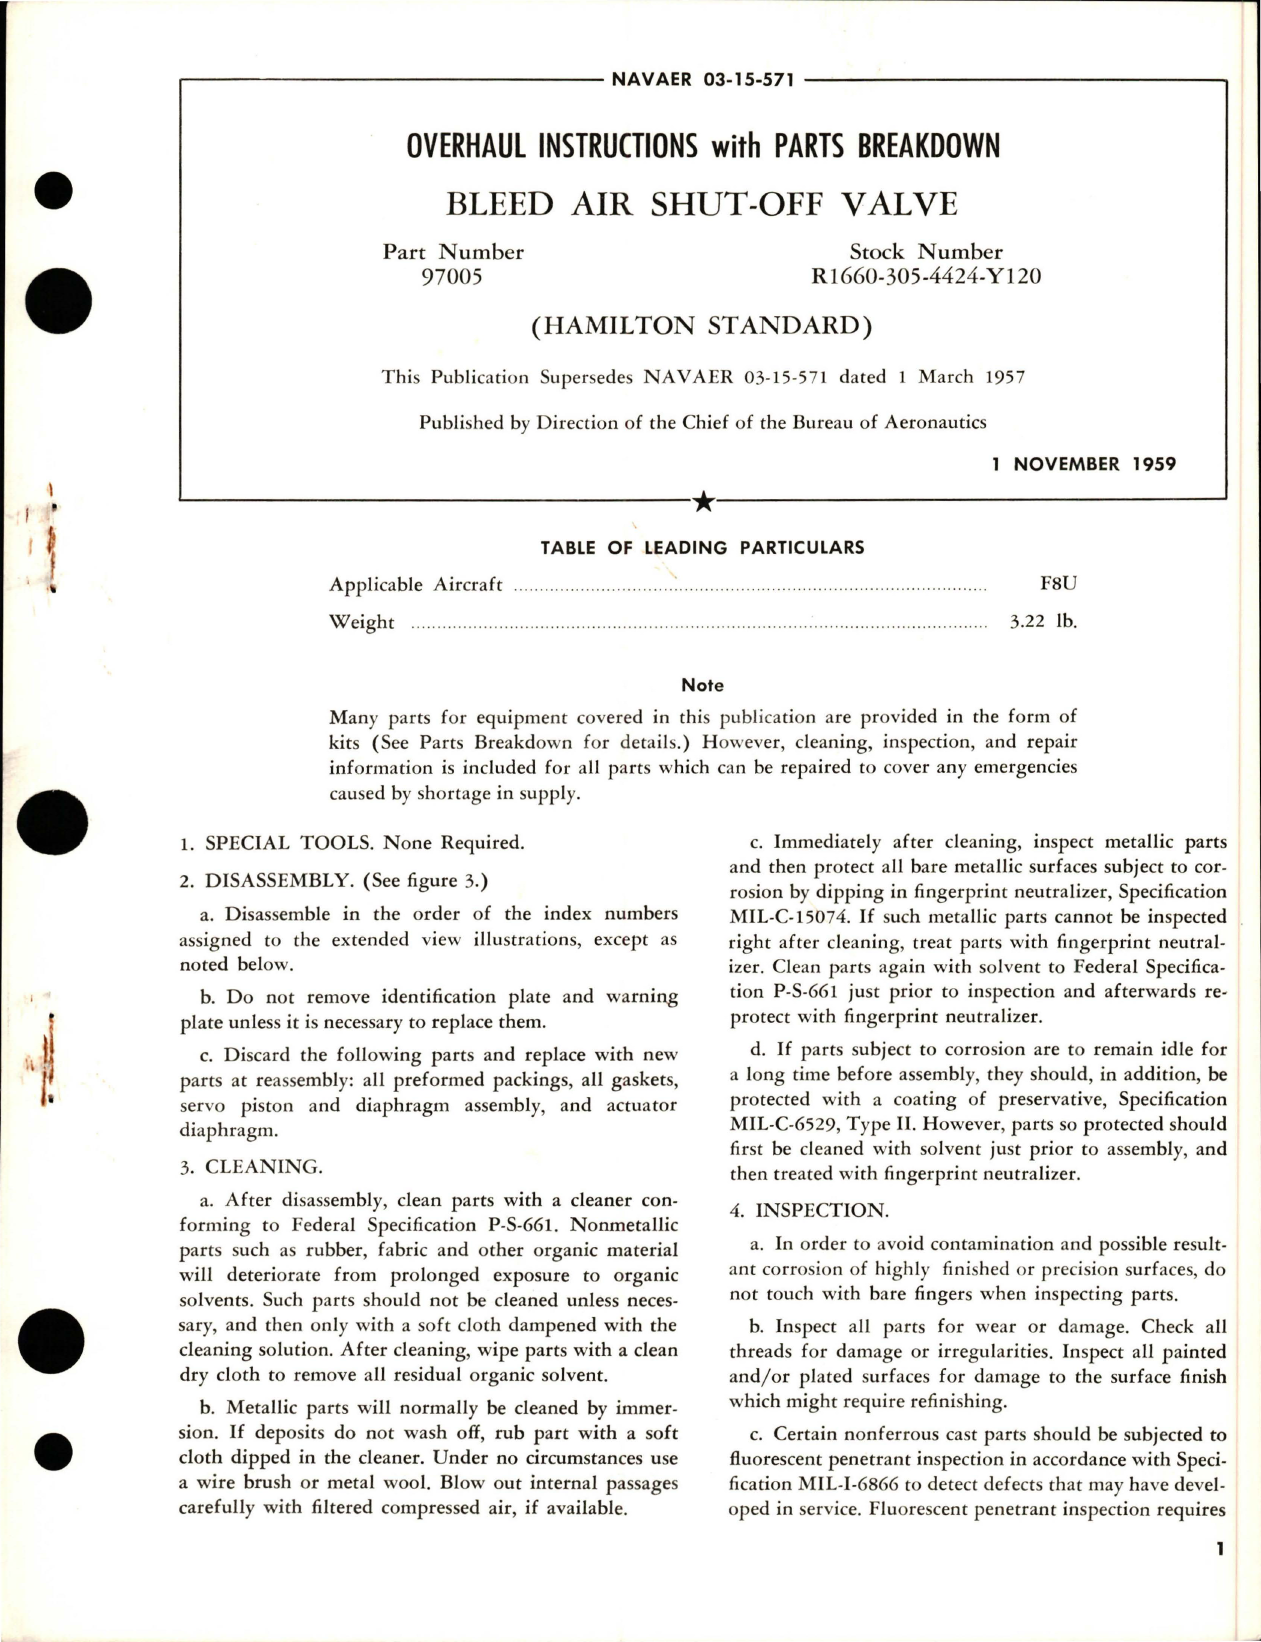 Sample page 1 from AirCorps Library document: Overhaul Instructions with Parts for Bleed Air Shut Off Valve - Part 97005